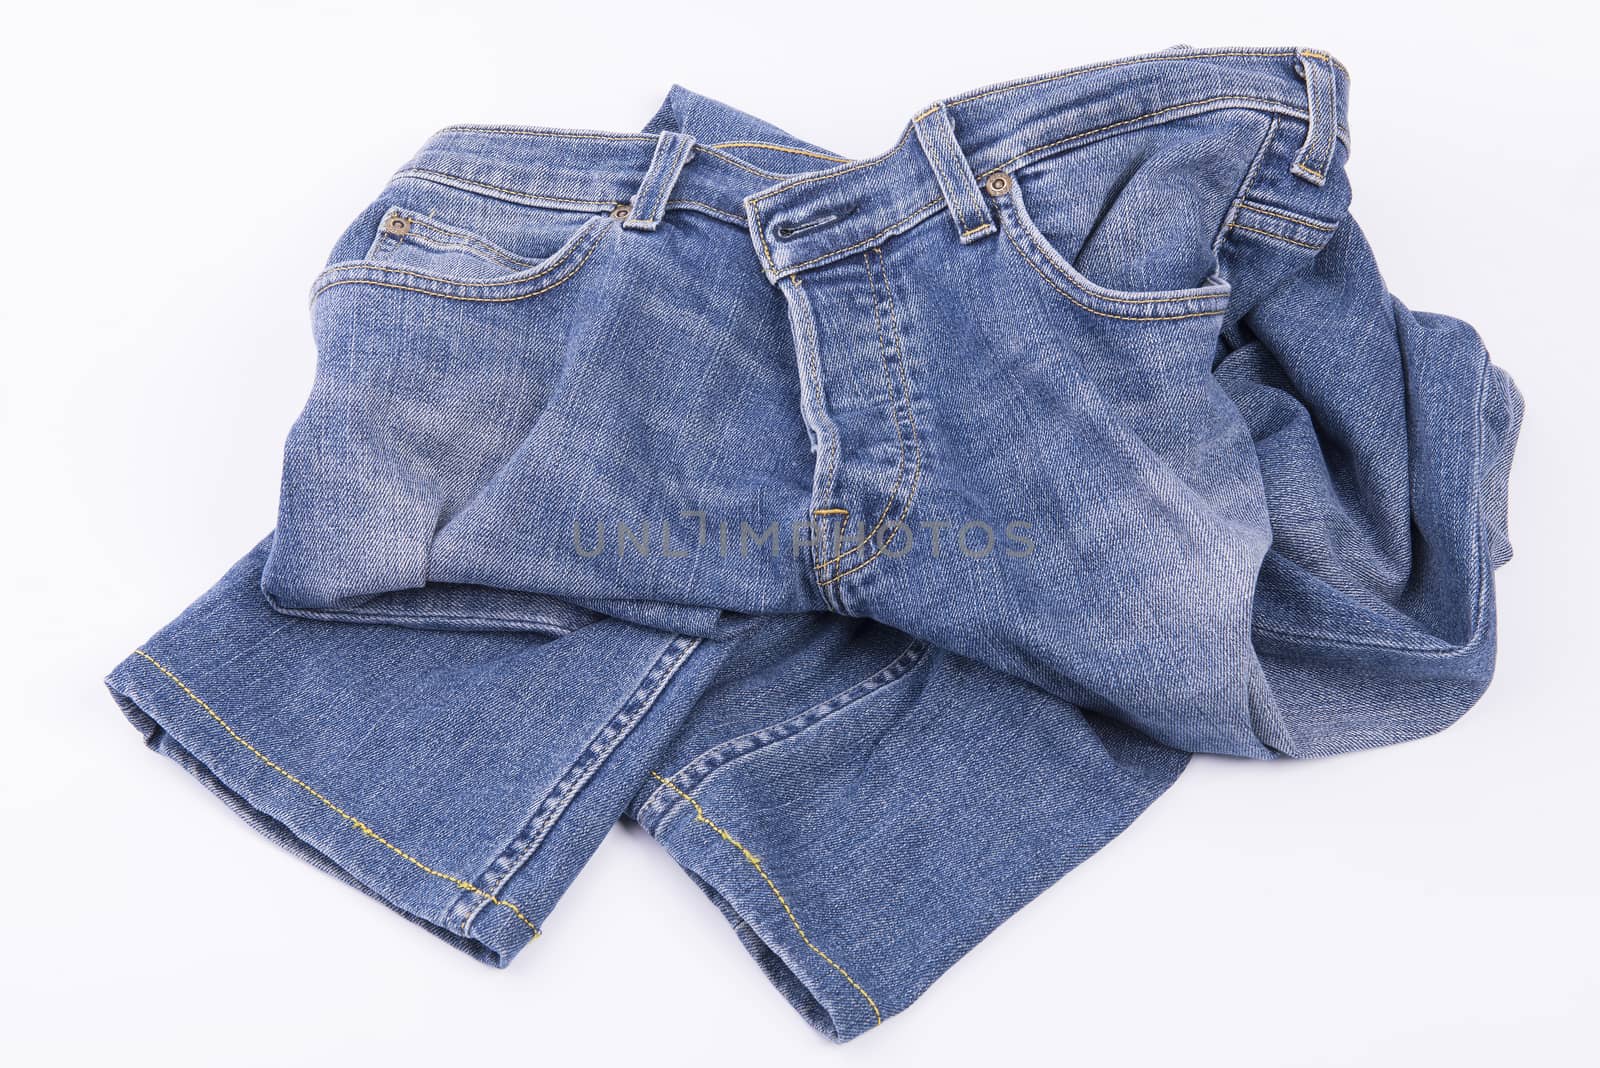 old jeans pants on a white background